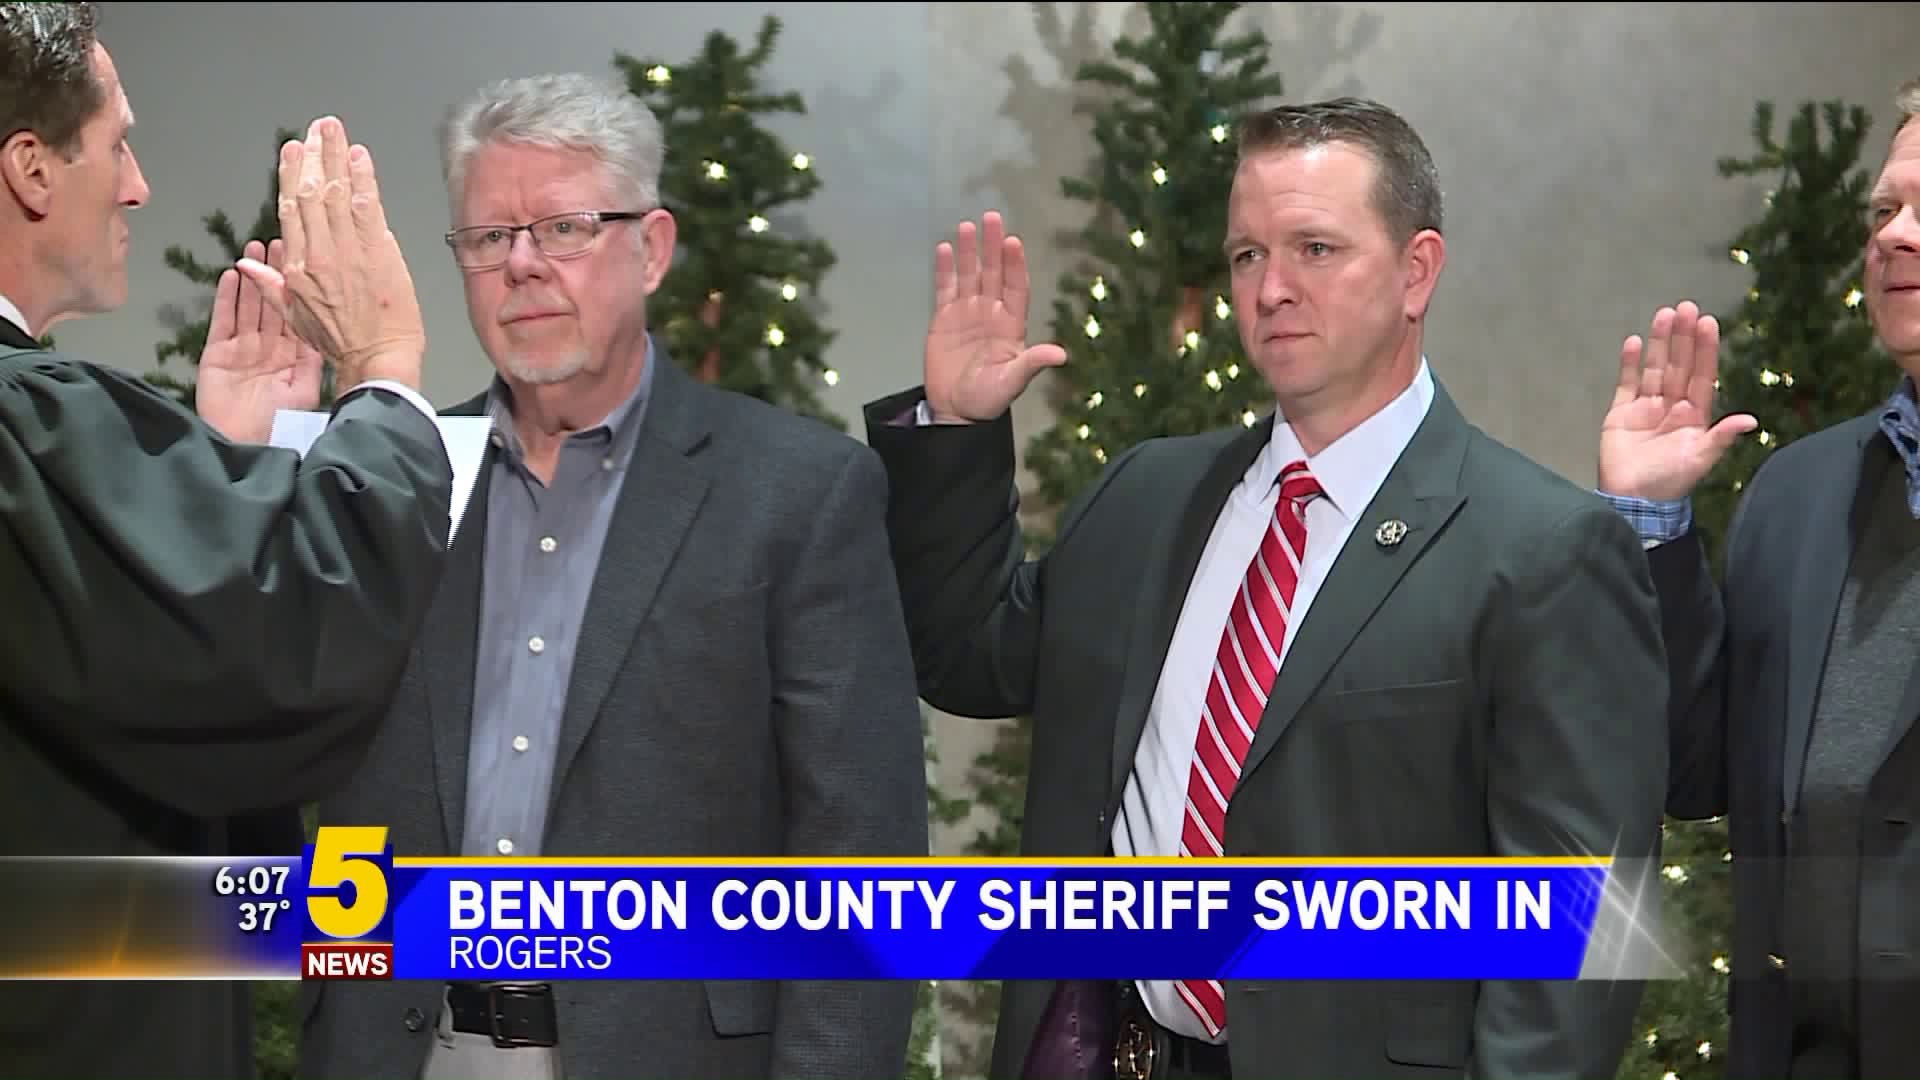 Benton County Kicks Off New Year With Swearing In Ceremony For Elected